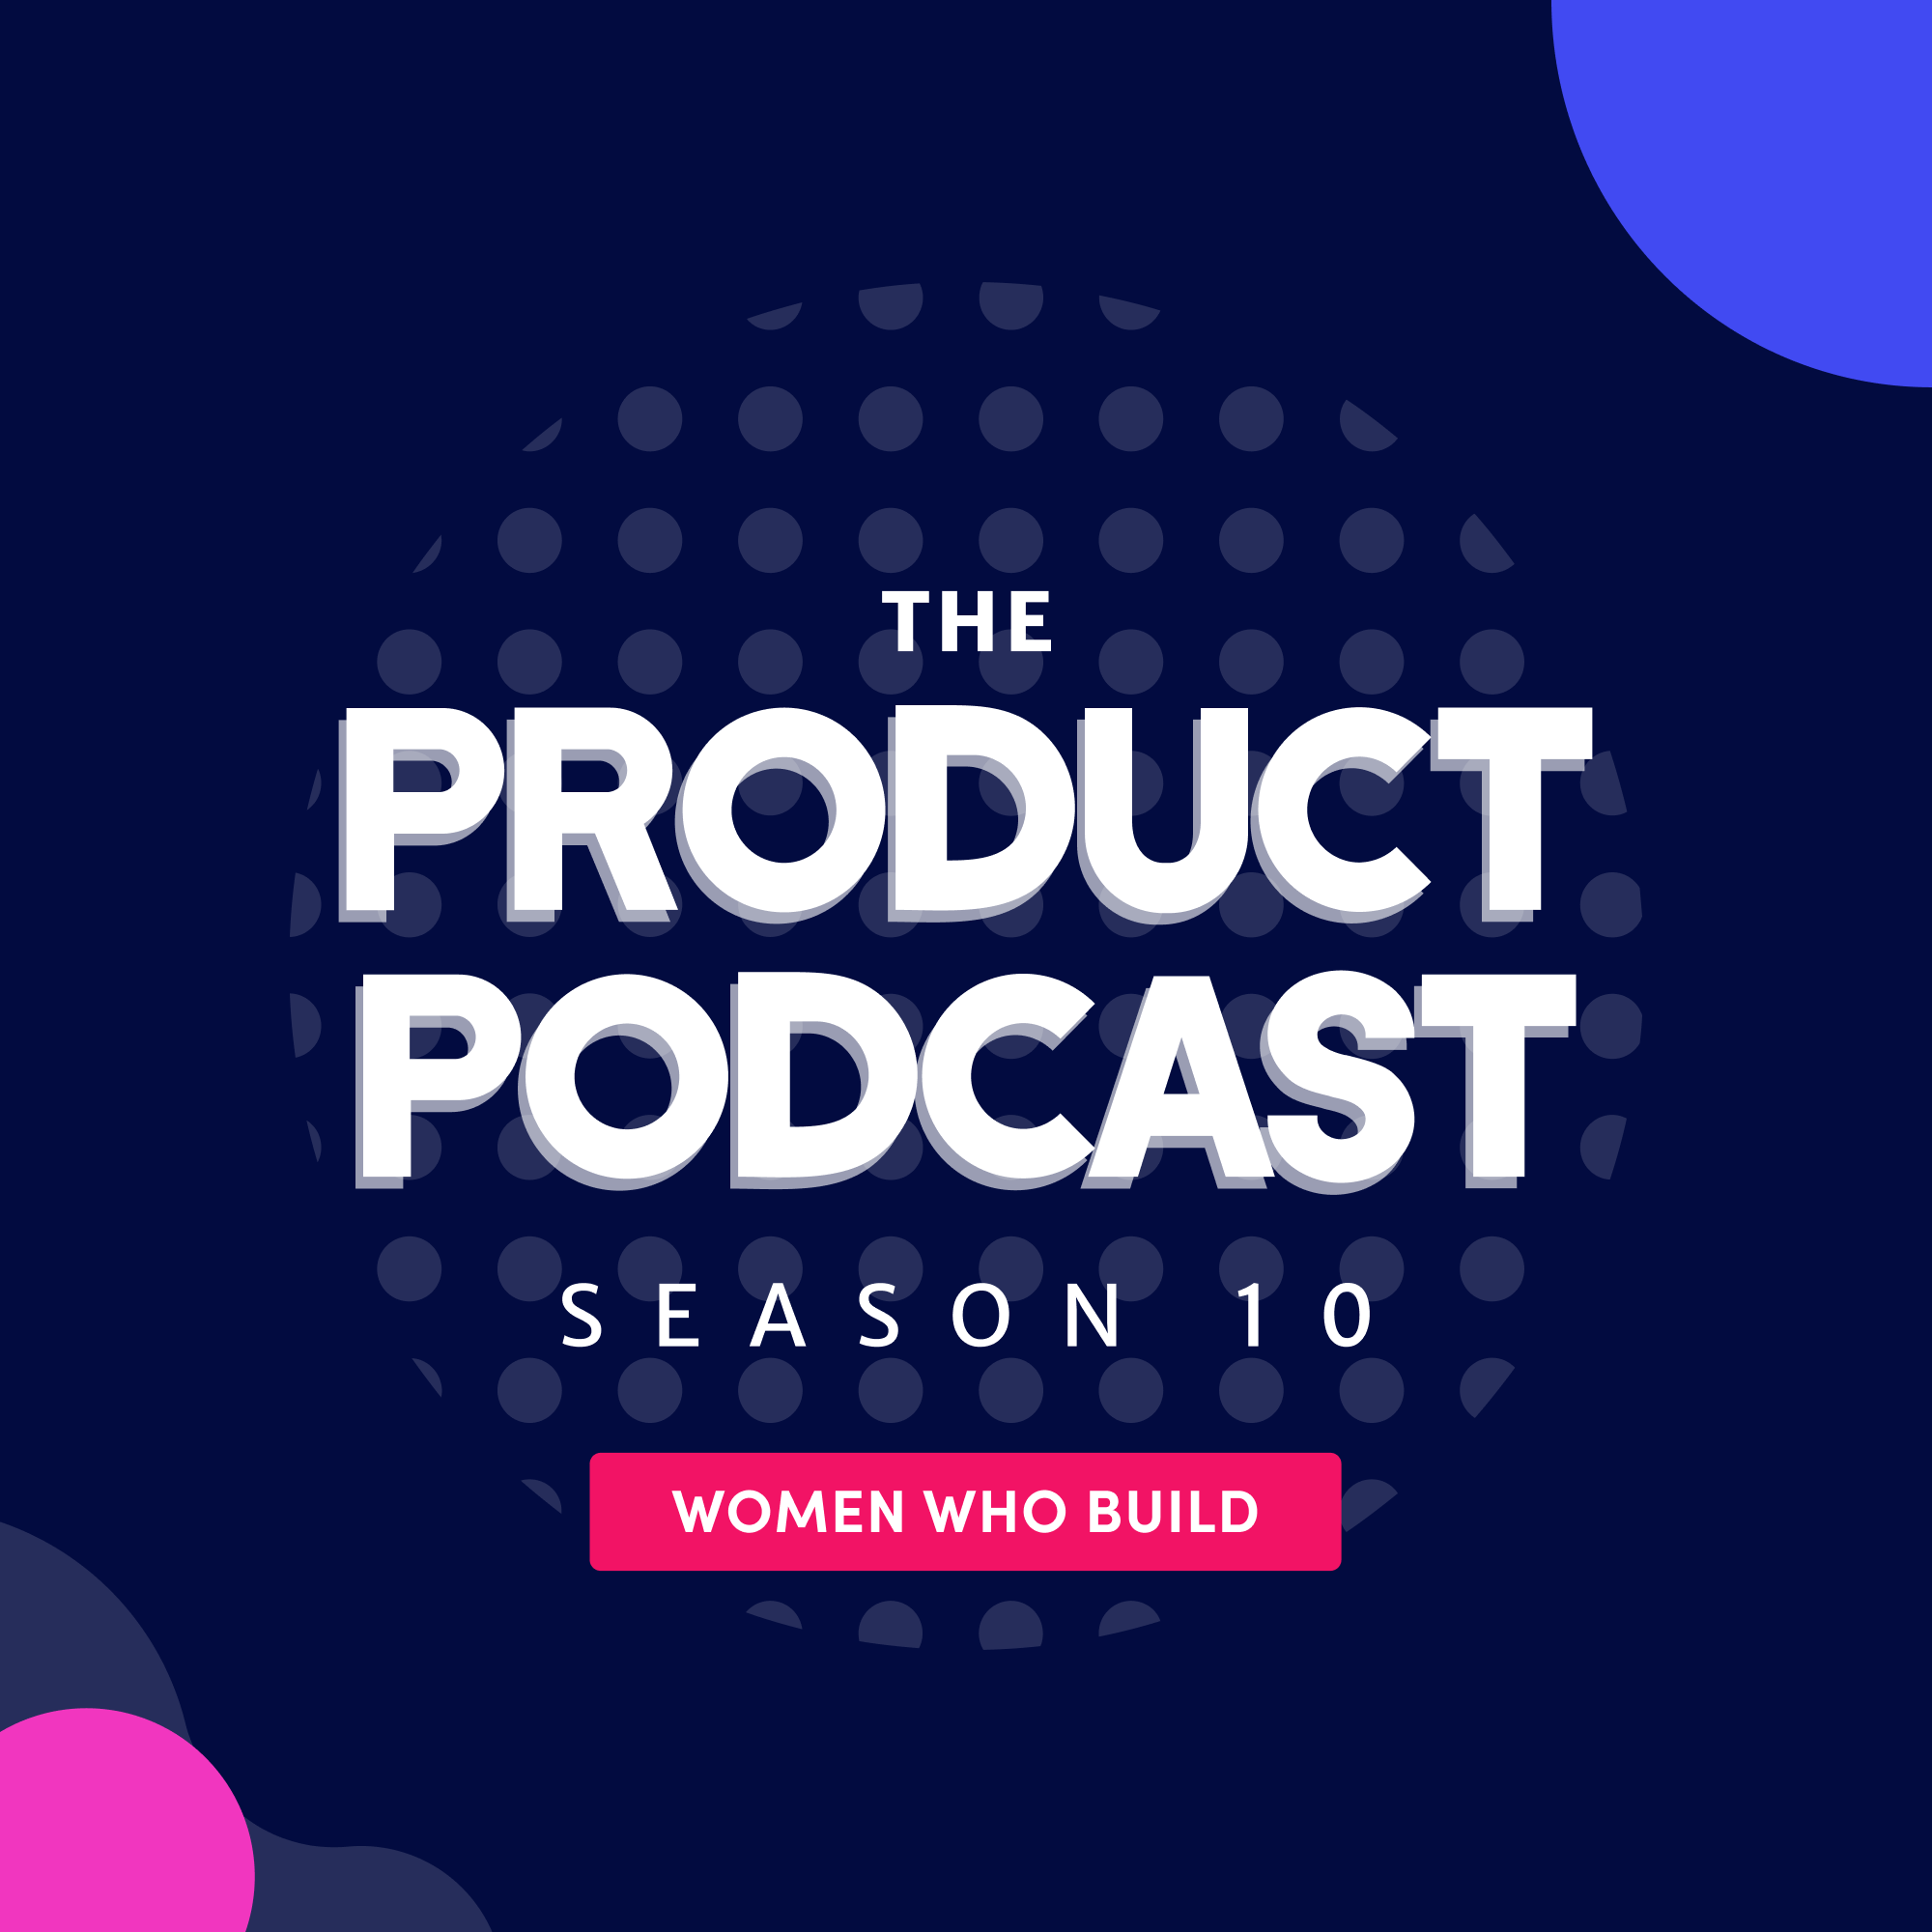 Product Podcast Season 10 Cover "Women who build"